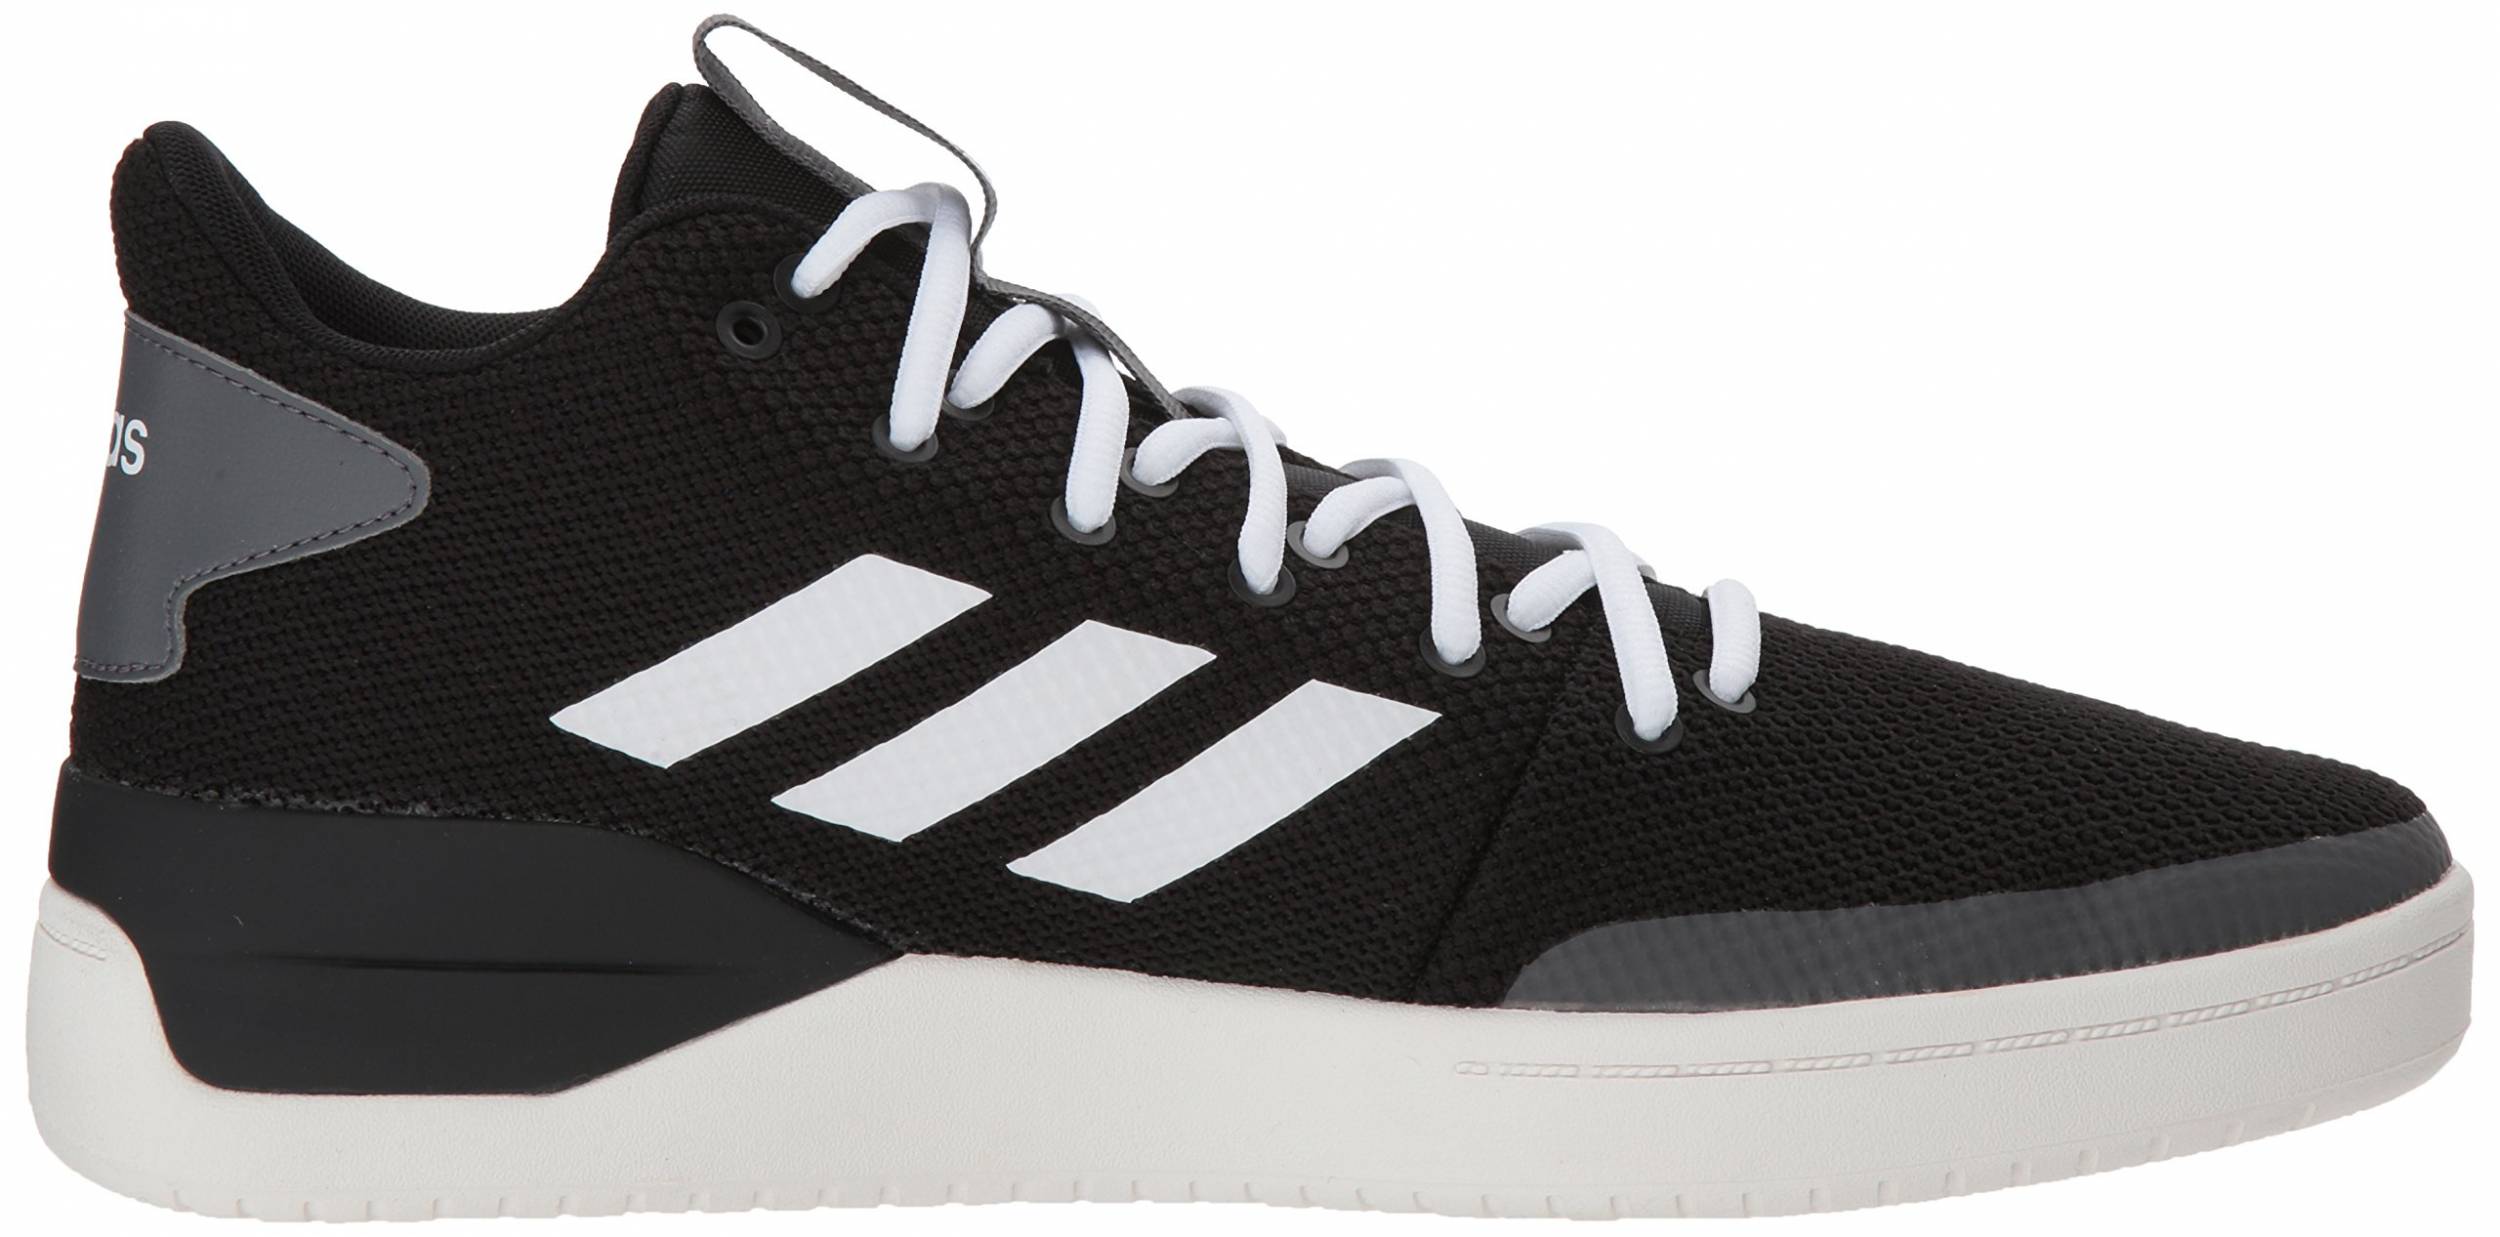 Adidas BBall80s deals from $27 in white 